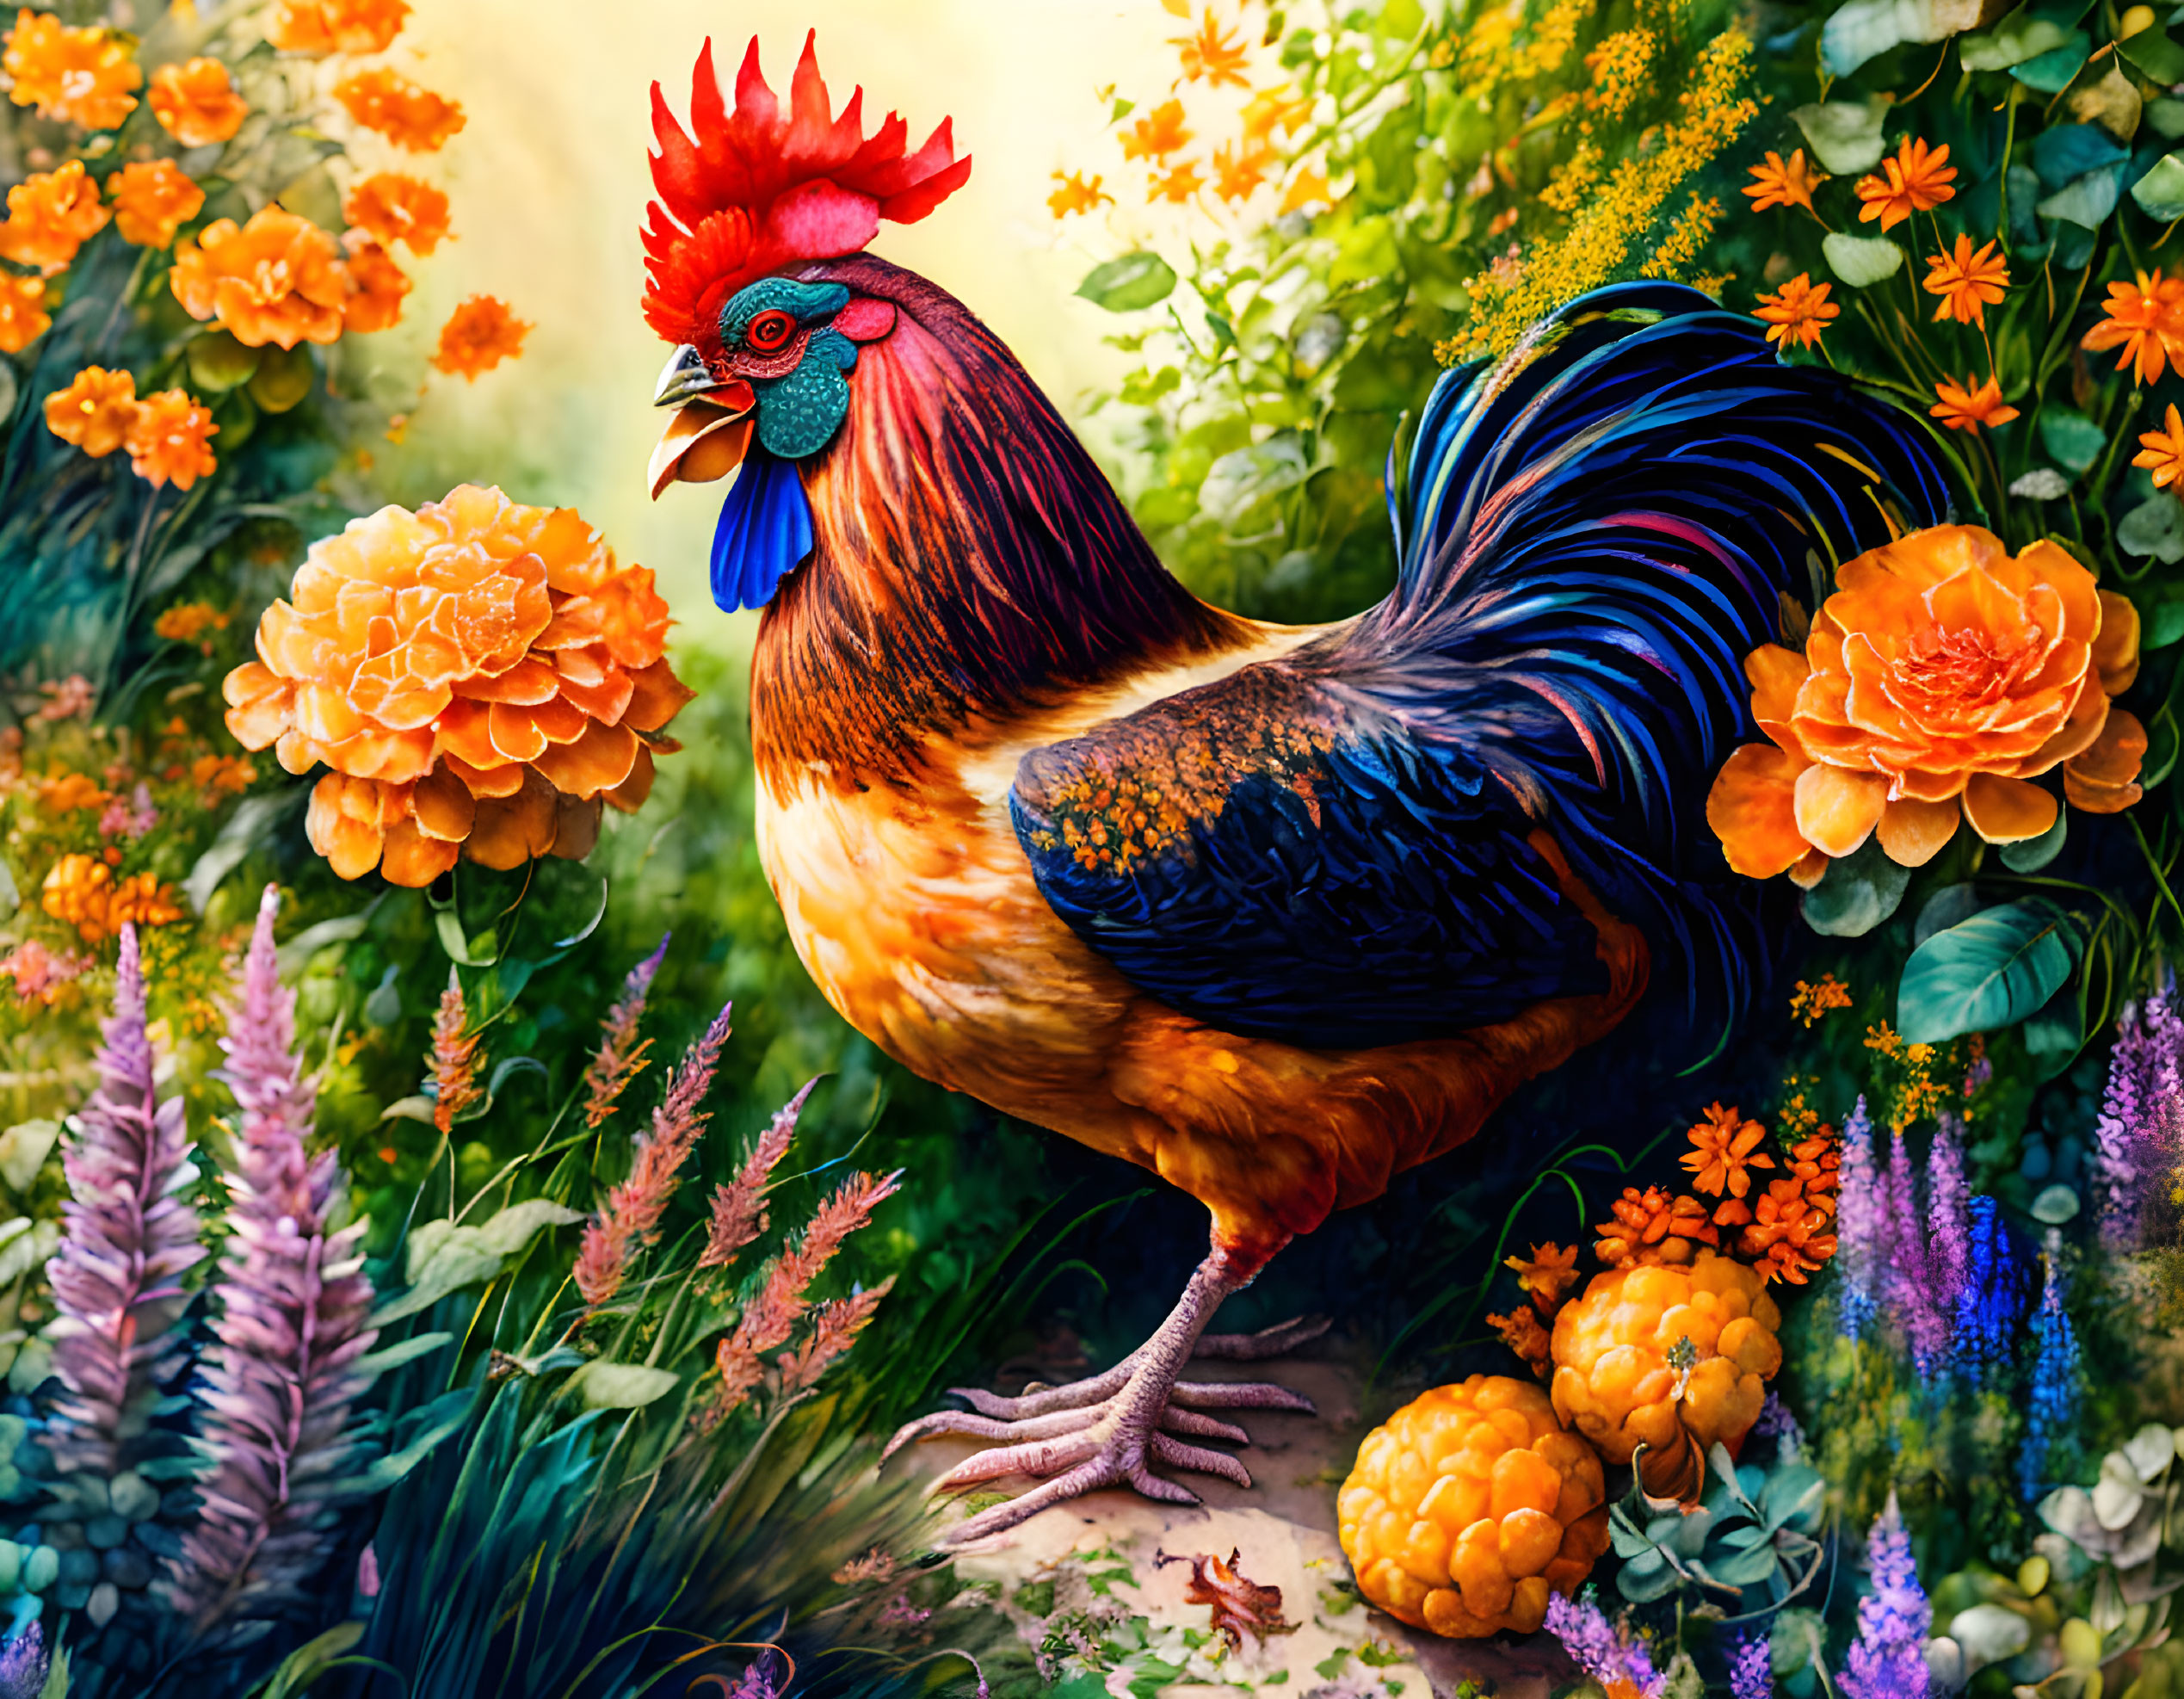 Colorful Rooster in Lush Garden with Flowers and Foliage